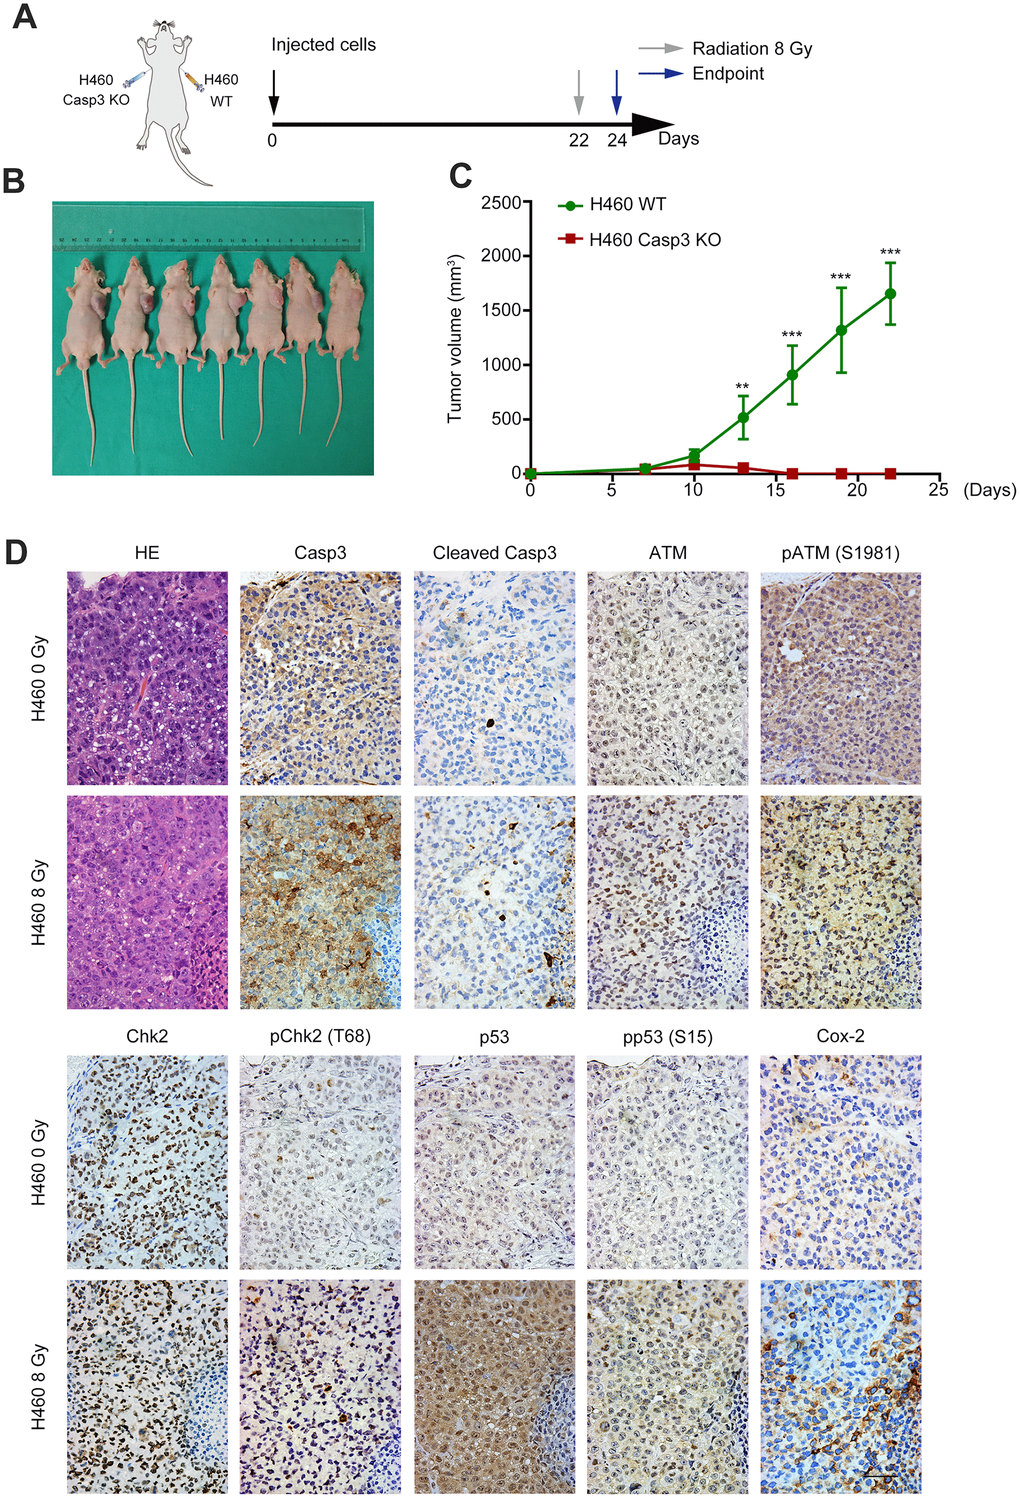 Casp3 KO inhibits tumor formation, and radiations activate the ATM/p53/Cox-2 axis in vivo. (A) Treatment scheme for nude mice. (B) Images of tumors obtained on day 22. (C) The tumor volume of xenografts was measured with calipers every 2 or 3 days (**ppt test, n = 7). (D) Representative photomicrographs of hematoxylin and eosin (H&E) and immunohistochemical staining of caspase-3, cleaved caspase-3, ATM, pATM (S1981), Chk2, pChk2 (T68), p53, pp53 (S15), and Cox-2 in tumor tissues. Scale bars: 50 μm.